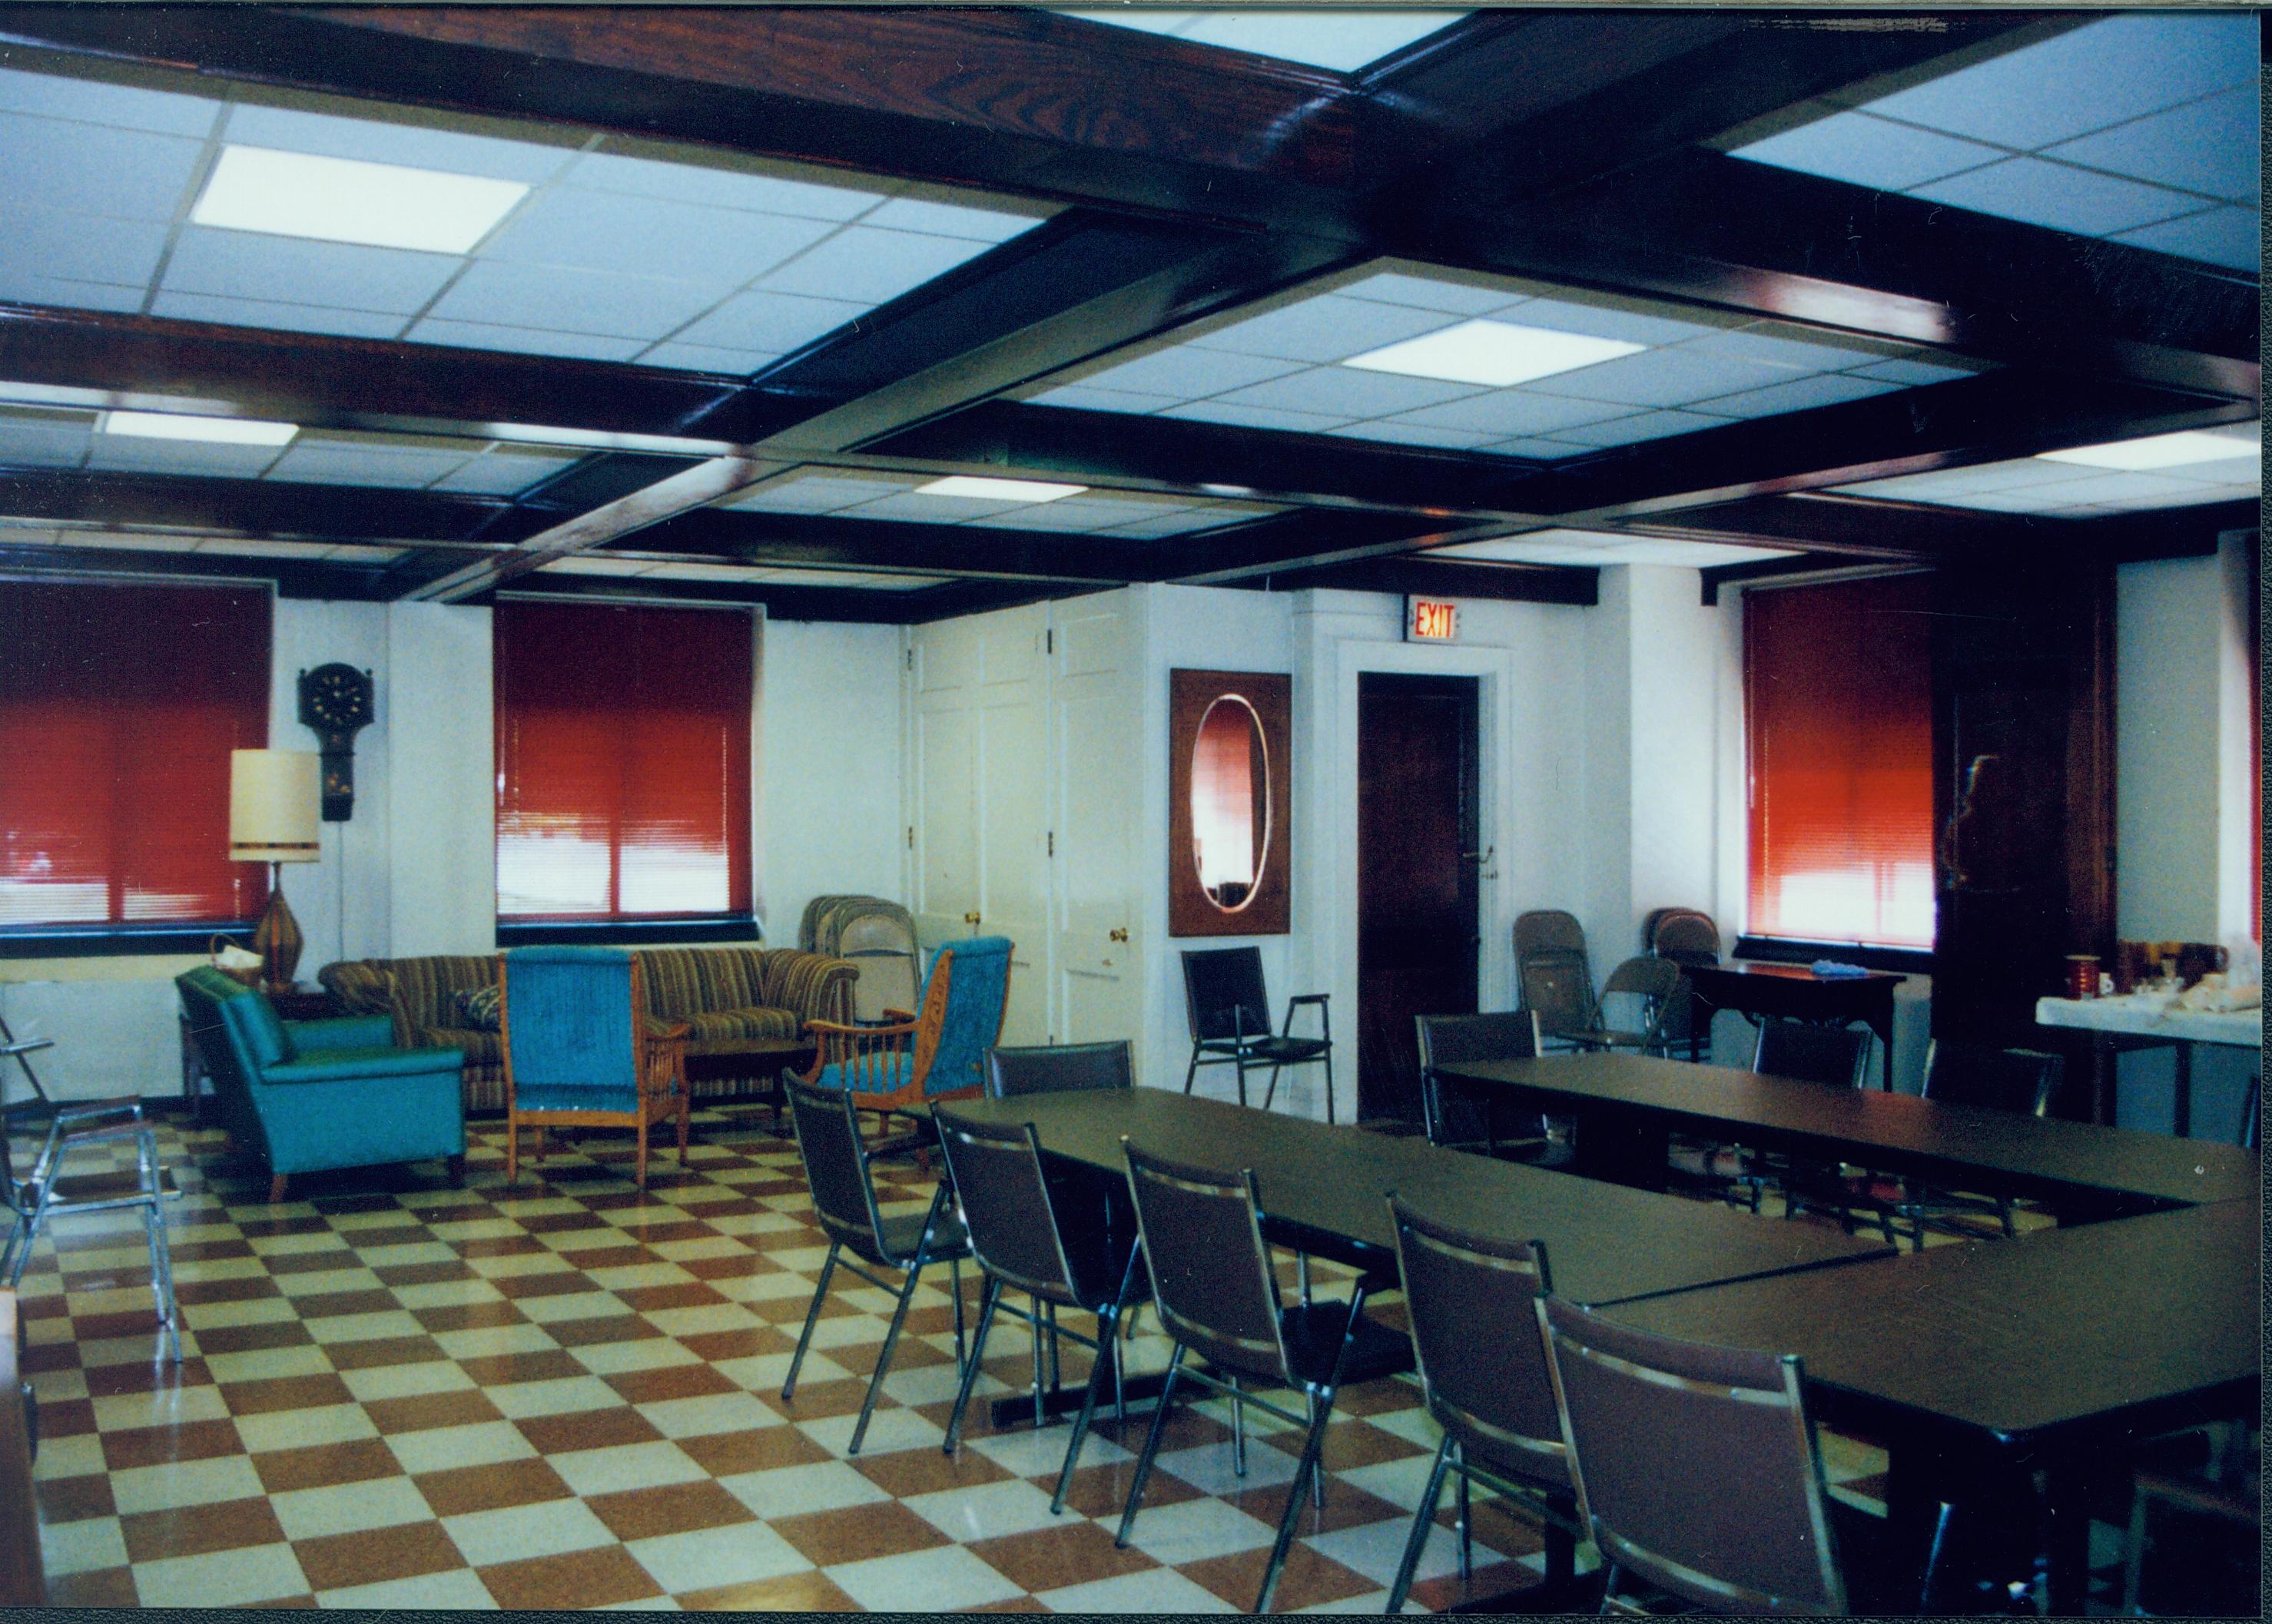 Tabels and chairs in large room. Grace Lutheran Church